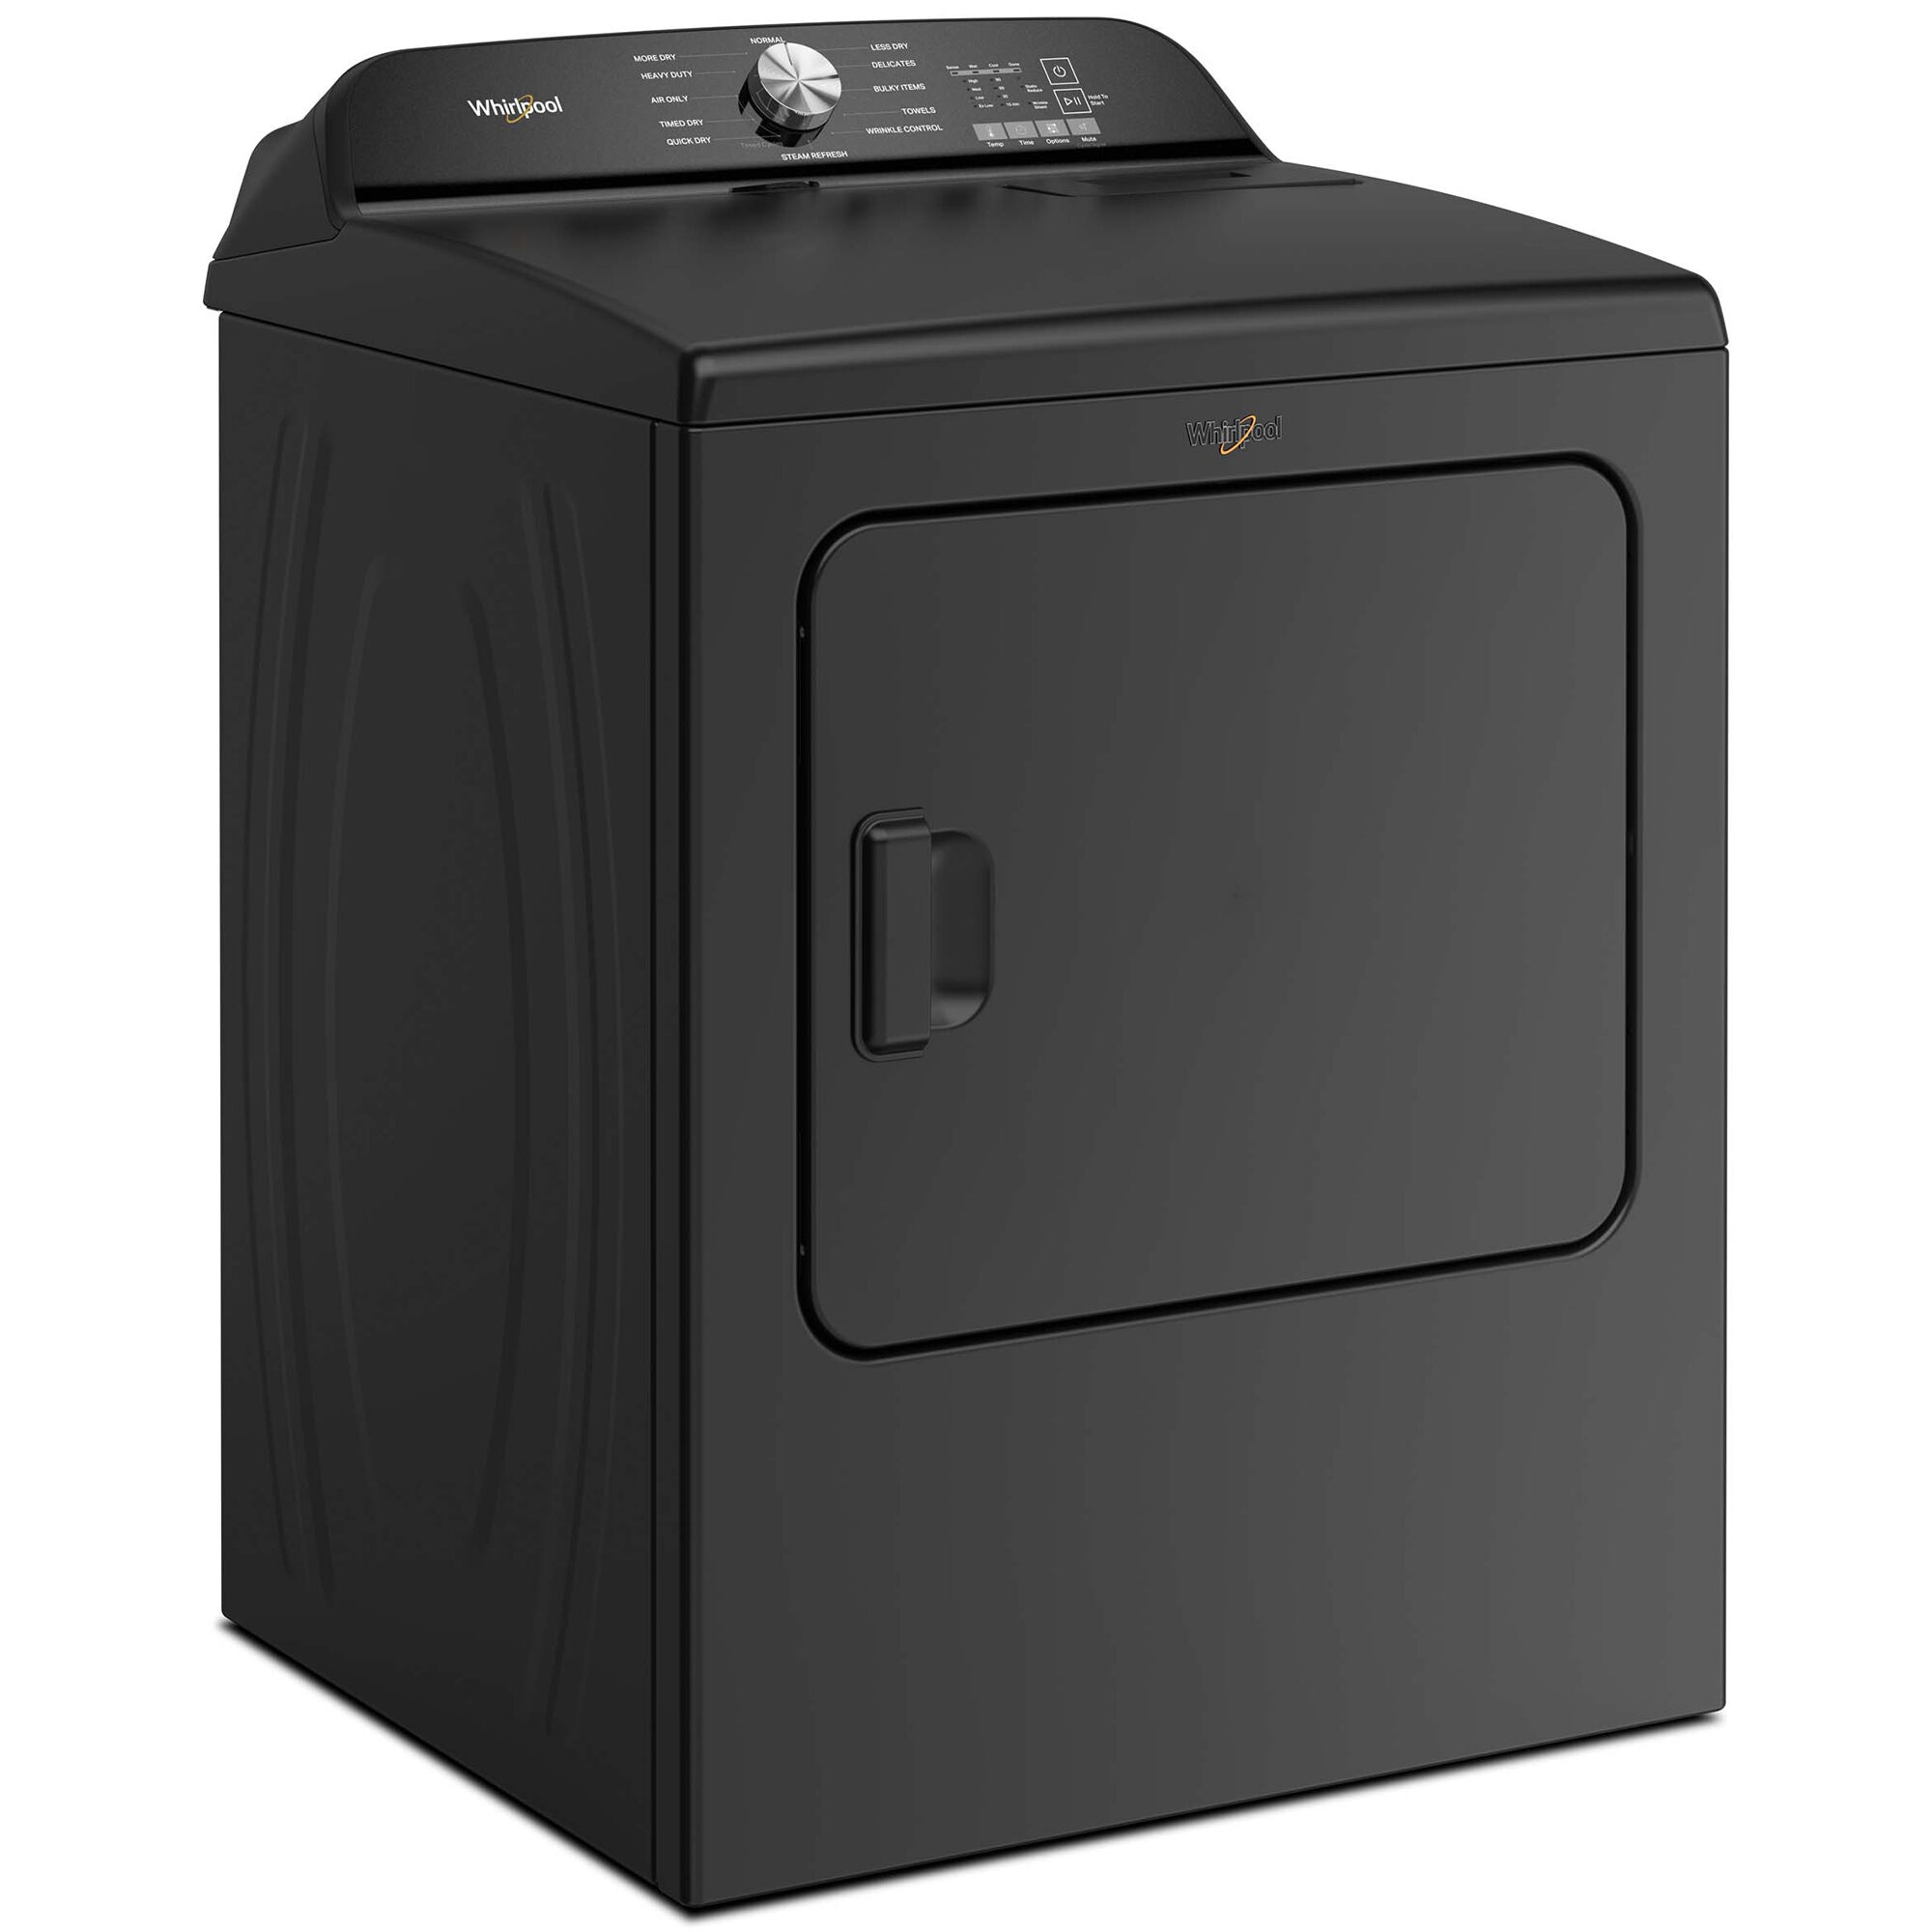 Whirlpool 29 in. 7.0 cu. ft. Electric Dryer with Wrinkle Shield Option,  Steam Cycle & Sensor Dry - Volcano Black